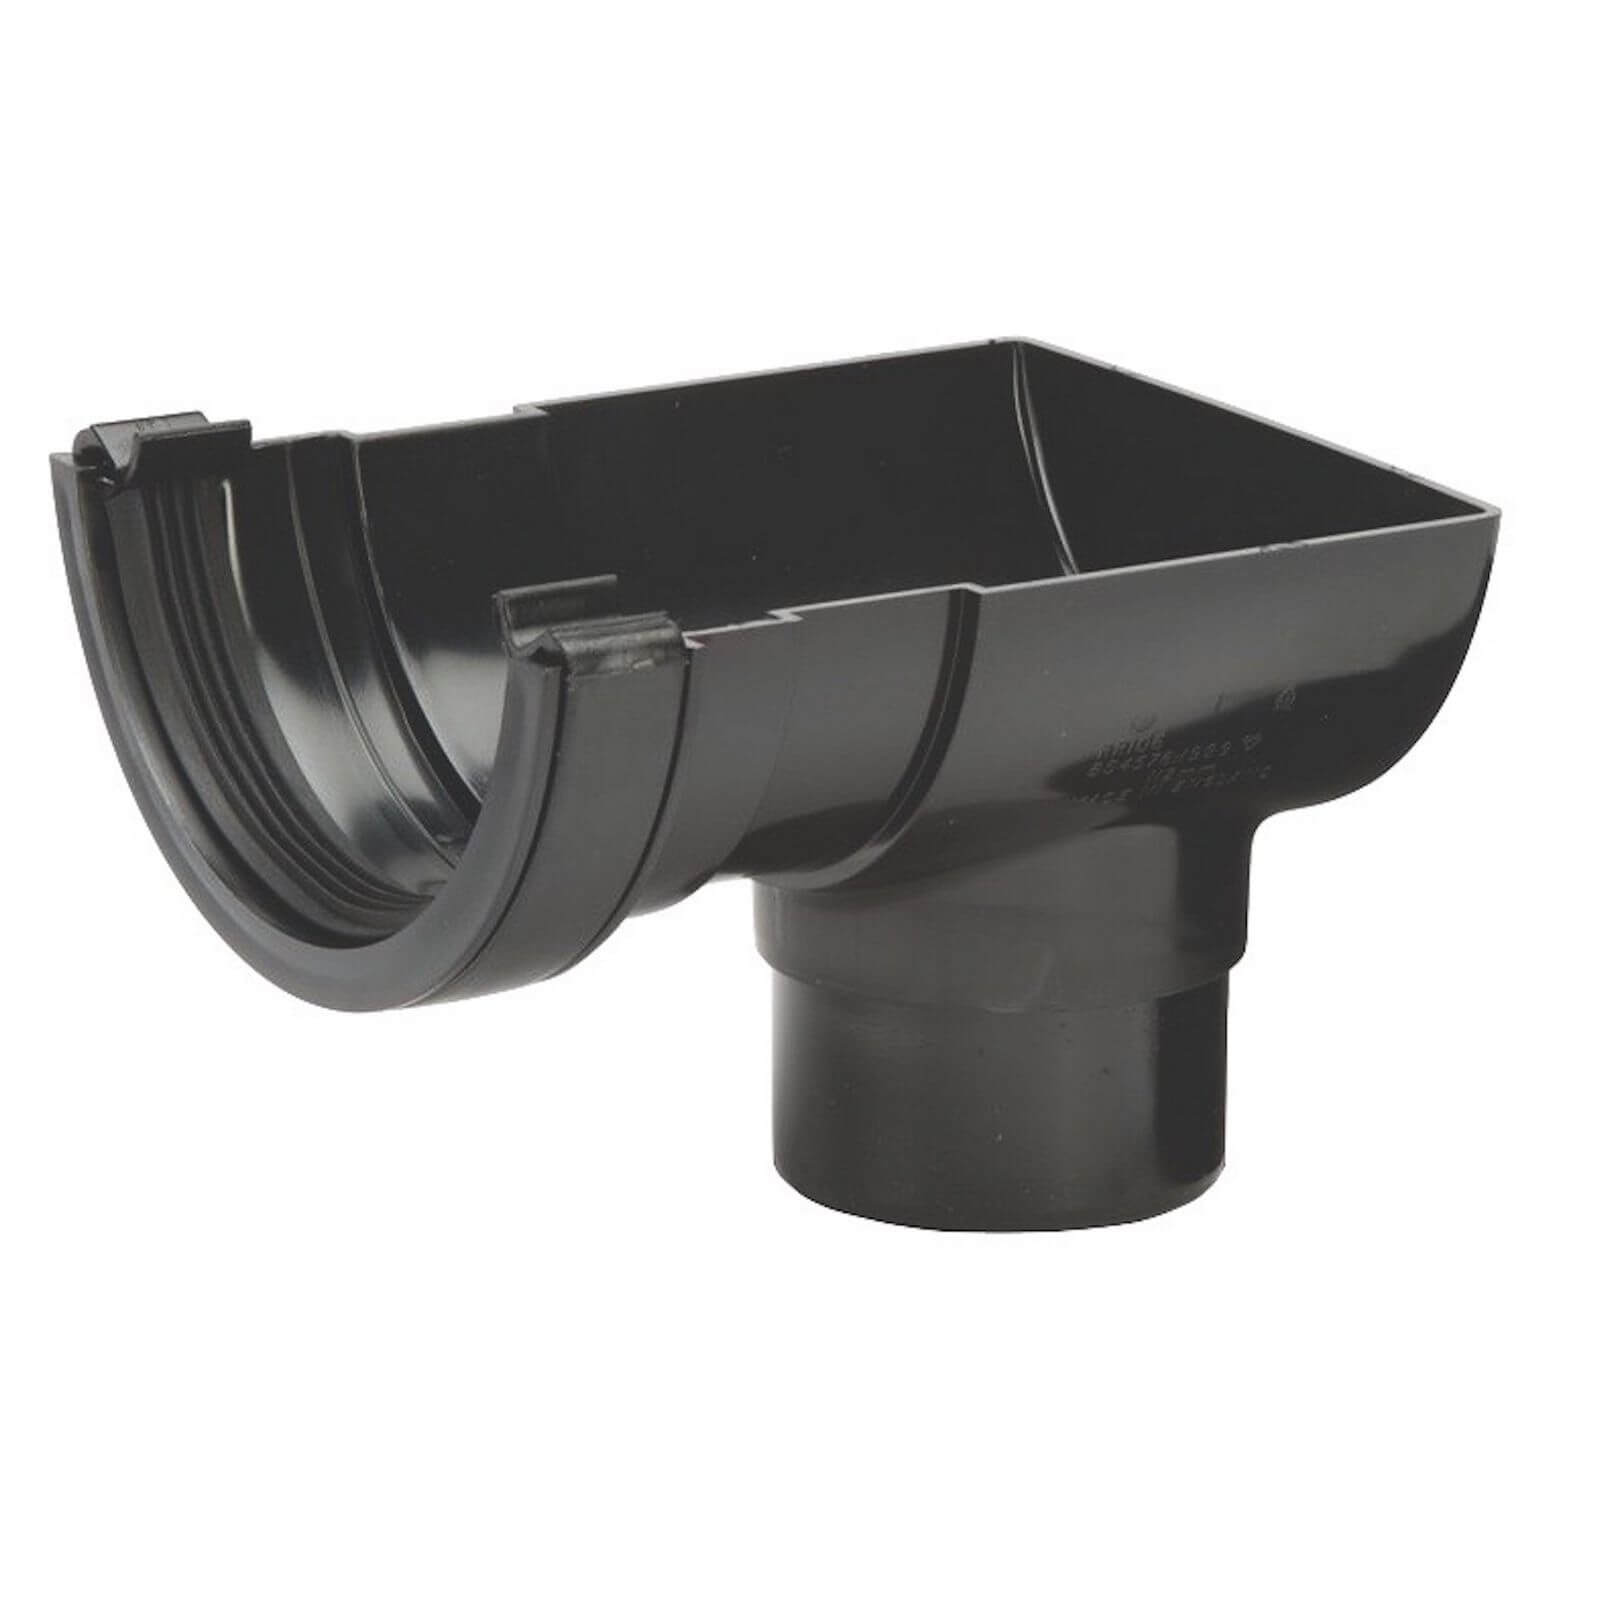 Polypipe Half Round Stop End Outlet - 112mm - Black